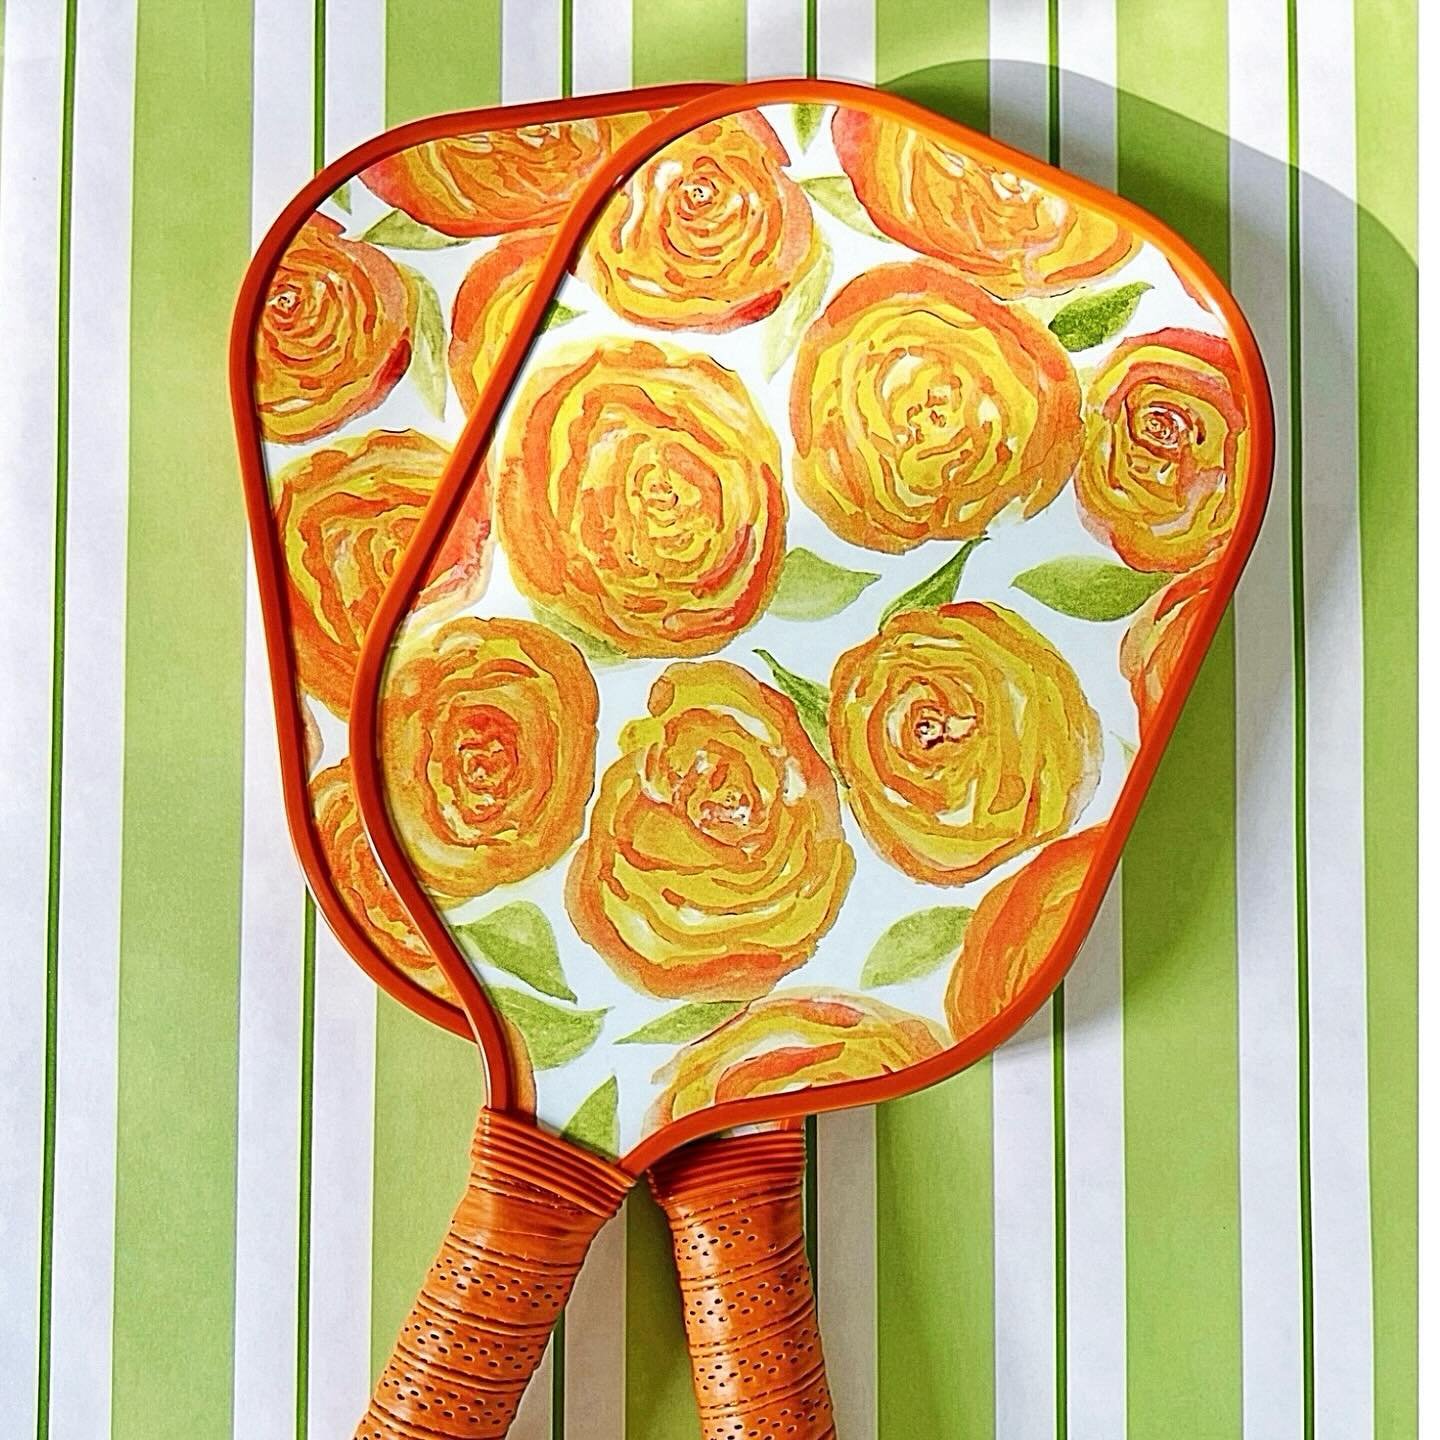 Game on with style! 
The 𝘔𝘦𝘦𝘵 𝘔𝘦 𝘢𝘵 𝘉𝘳𝘶𝘯𝘤𝘩 print has found its next calling in making pickleball perfection. These paddles feature a hand-wrapped grip to offer excellent feel and ample power for the competitive player.  Choose between w